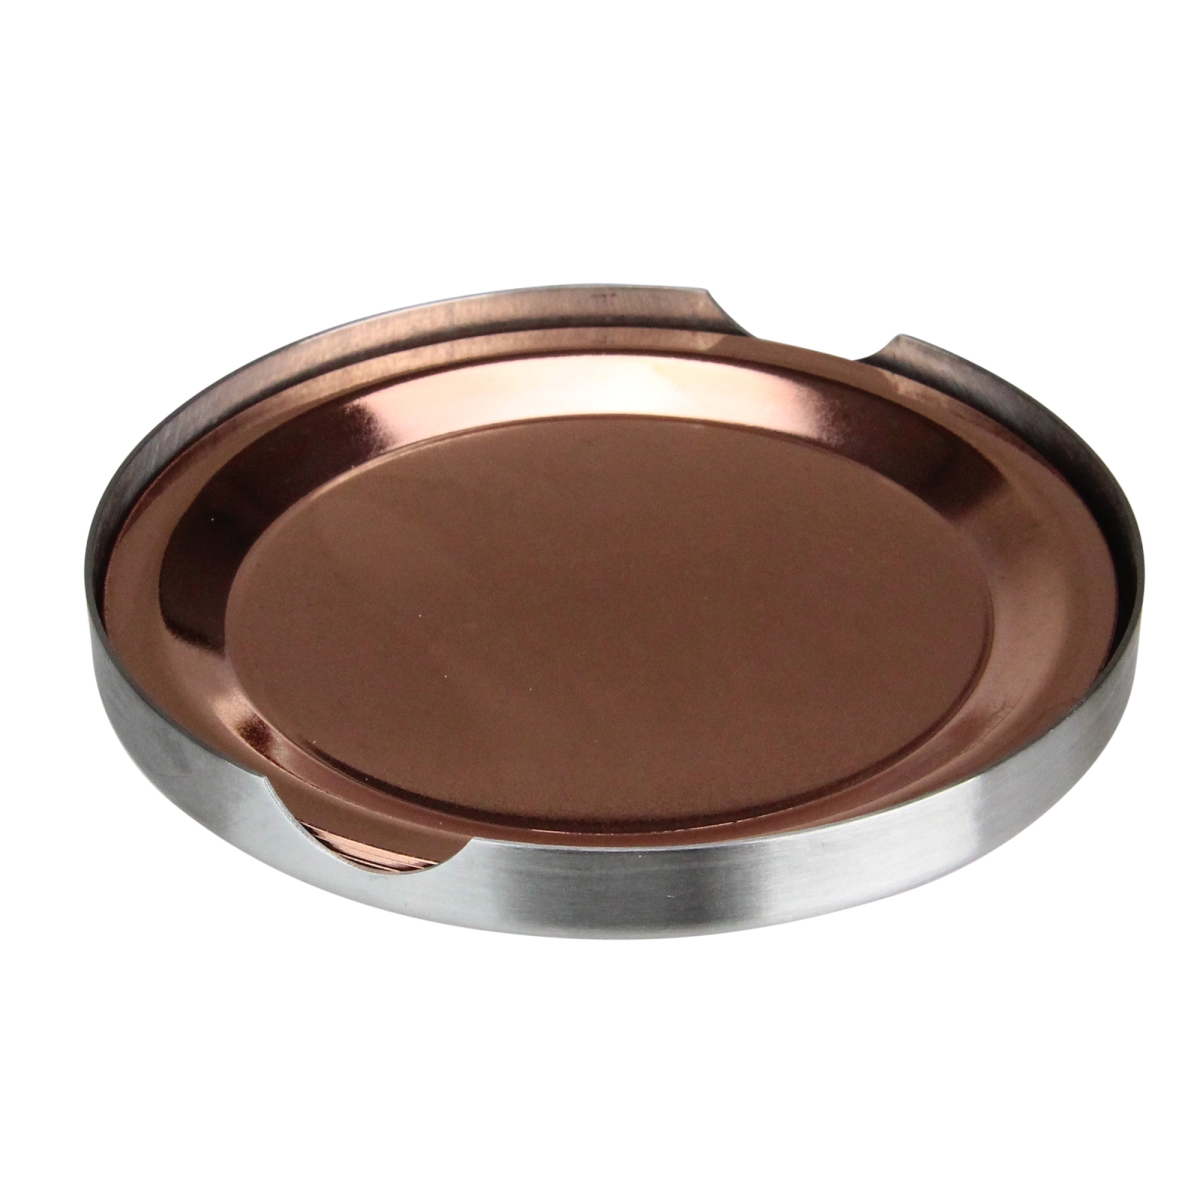 Picture of Avon 33537545 3.75 in. Stainless Steel Tabletop Coasters, Copper - Set of 4